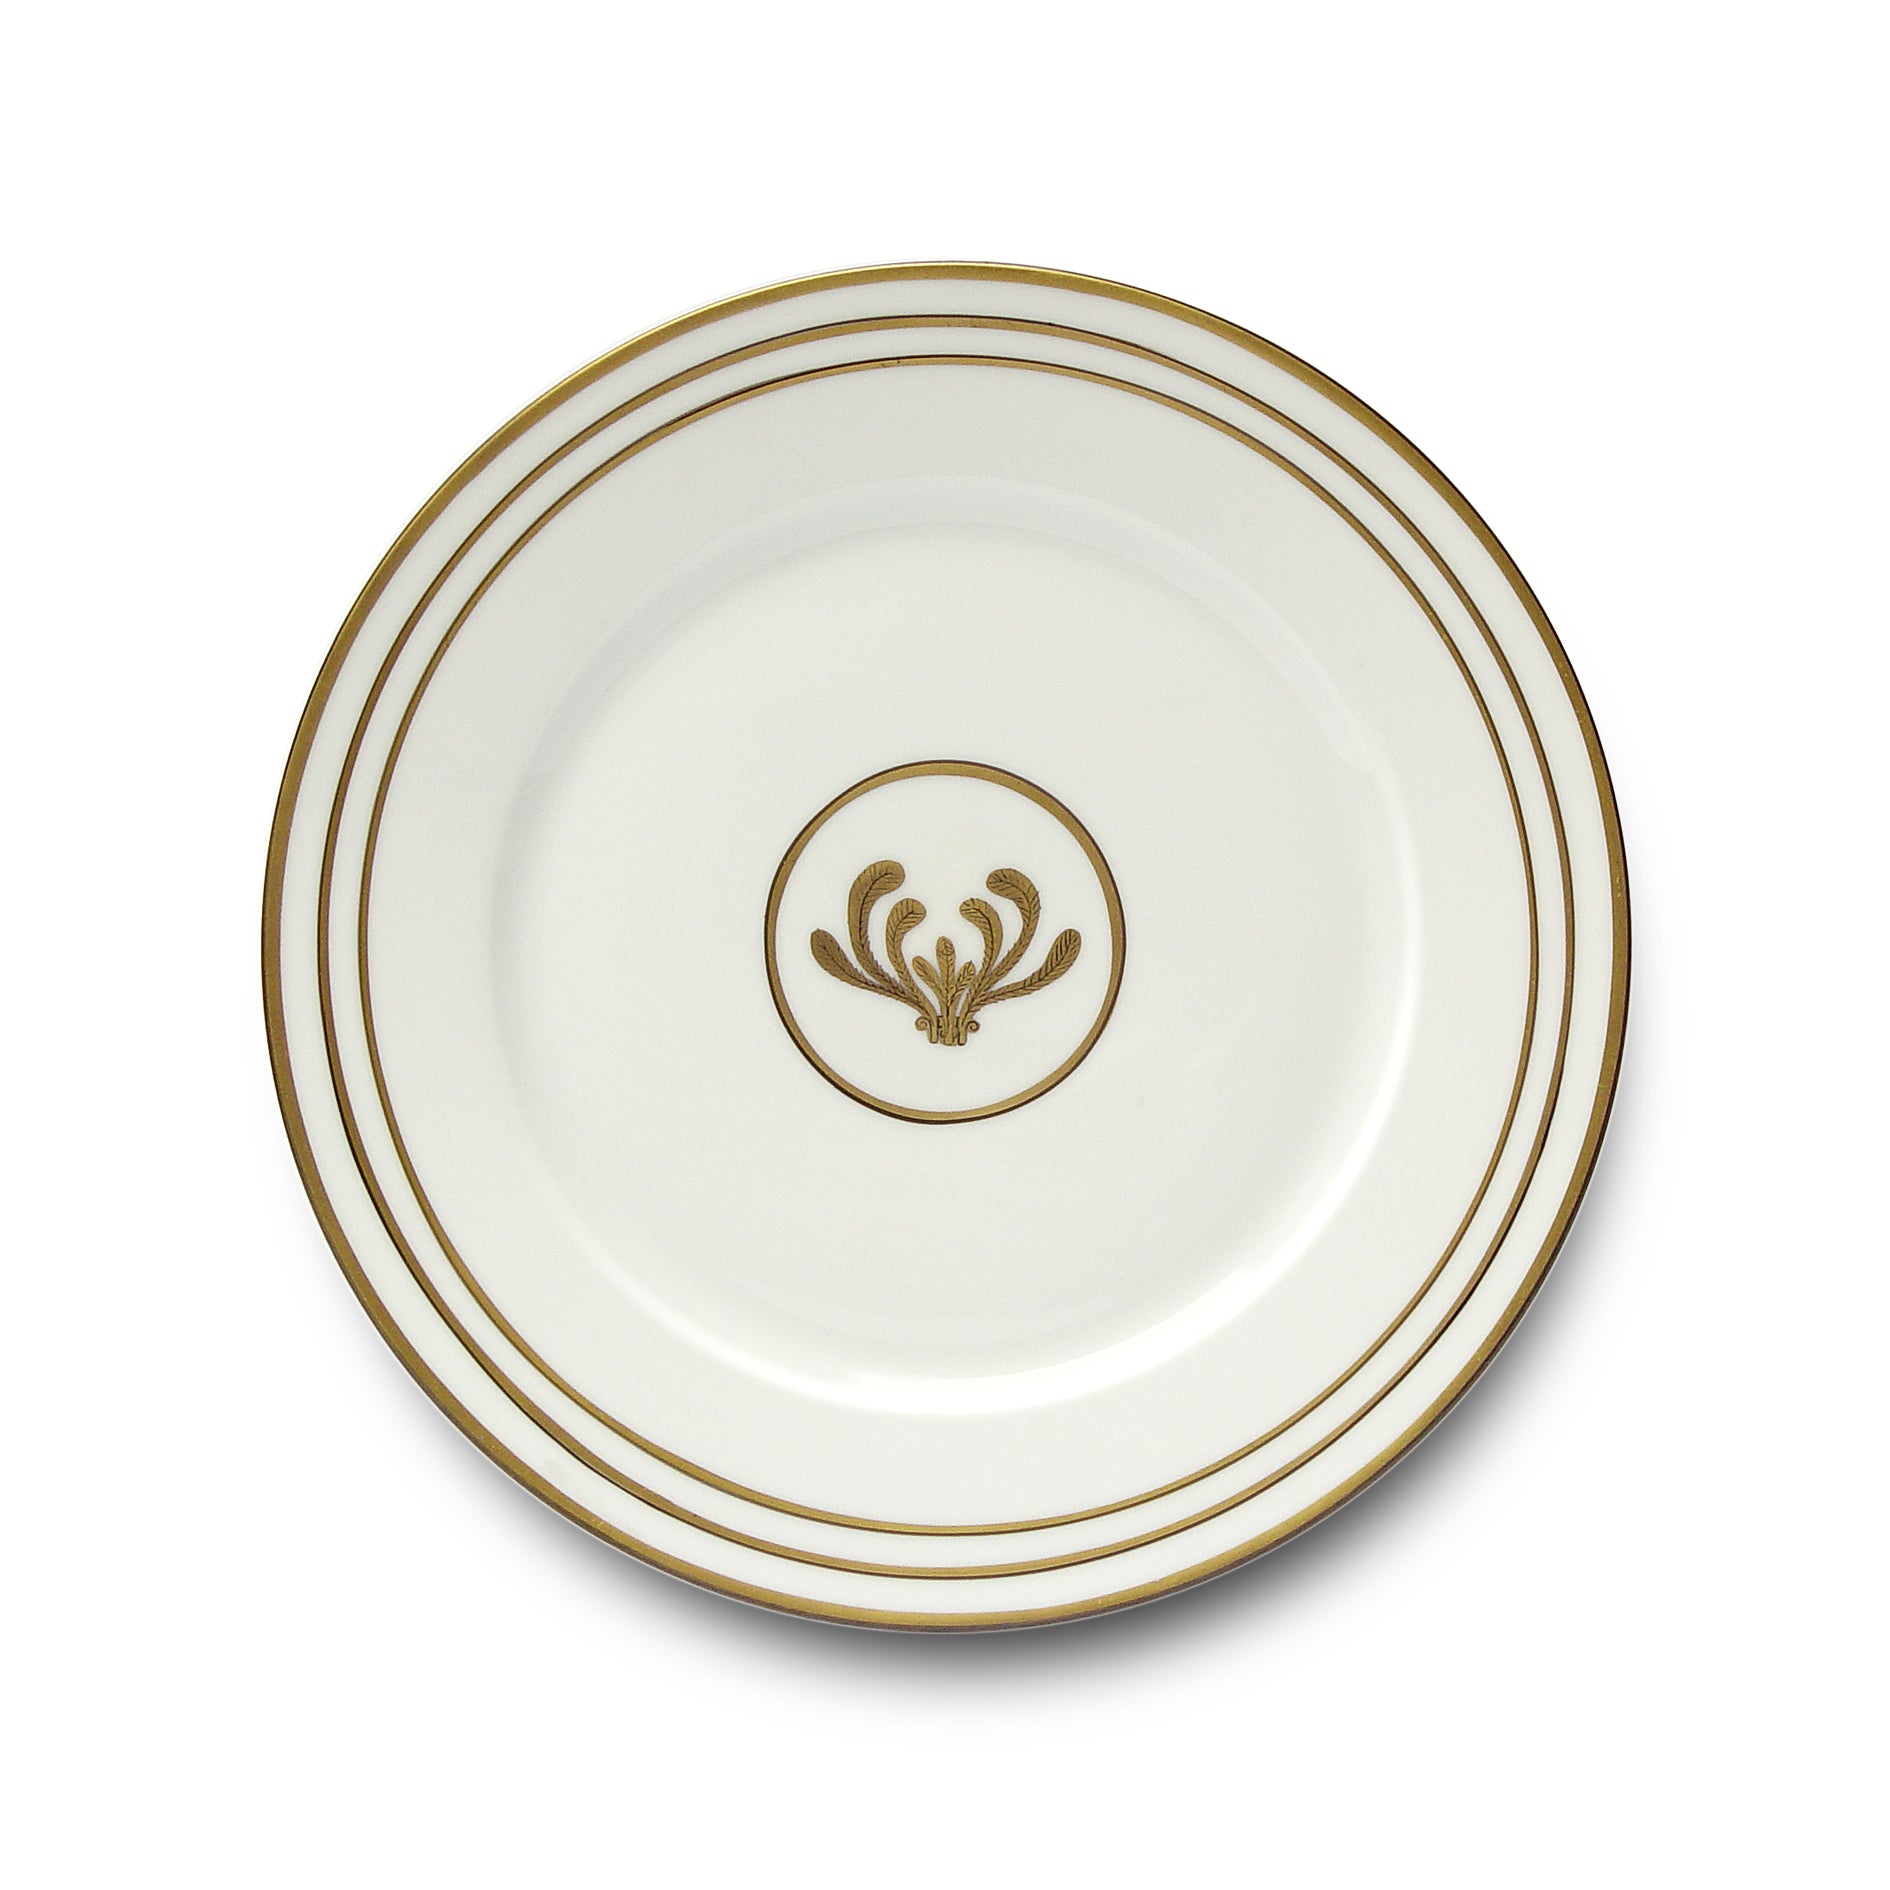 Or des Airs - Or des Mers - Dinner plate 03